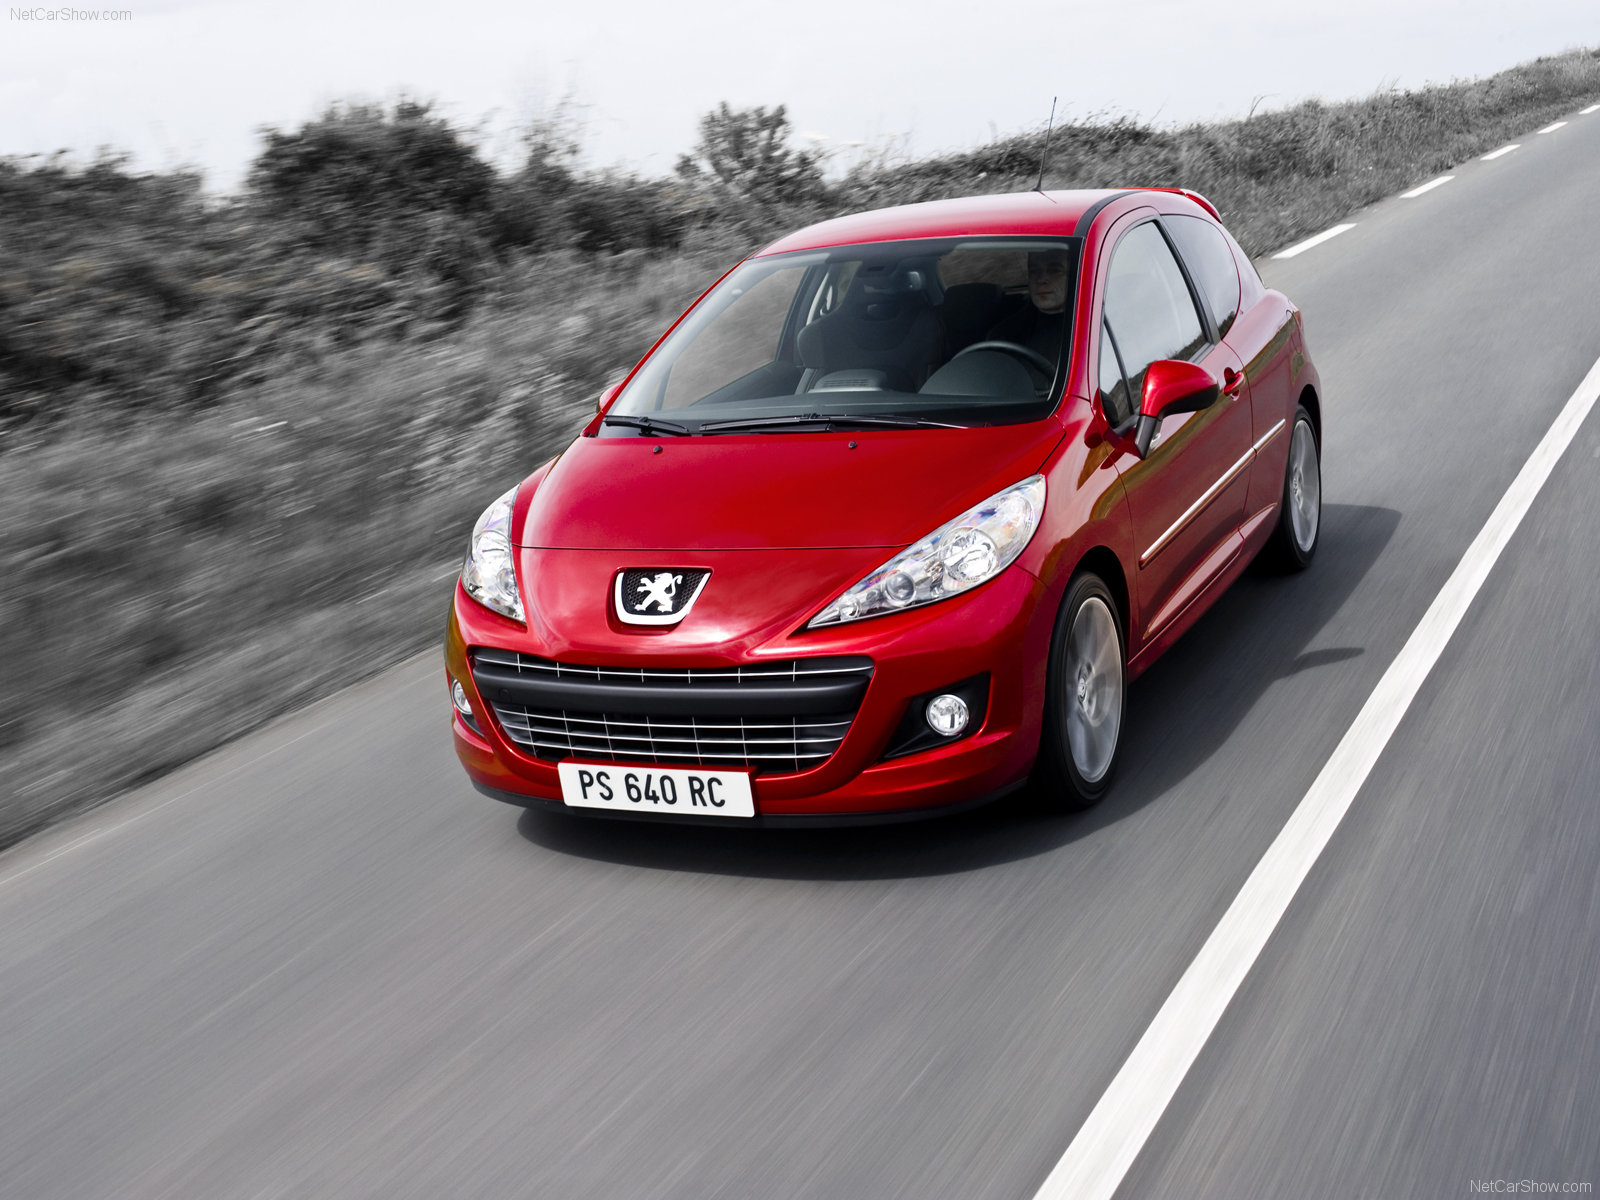 Peugeot 207 RC picture. Peugeot photo gallery